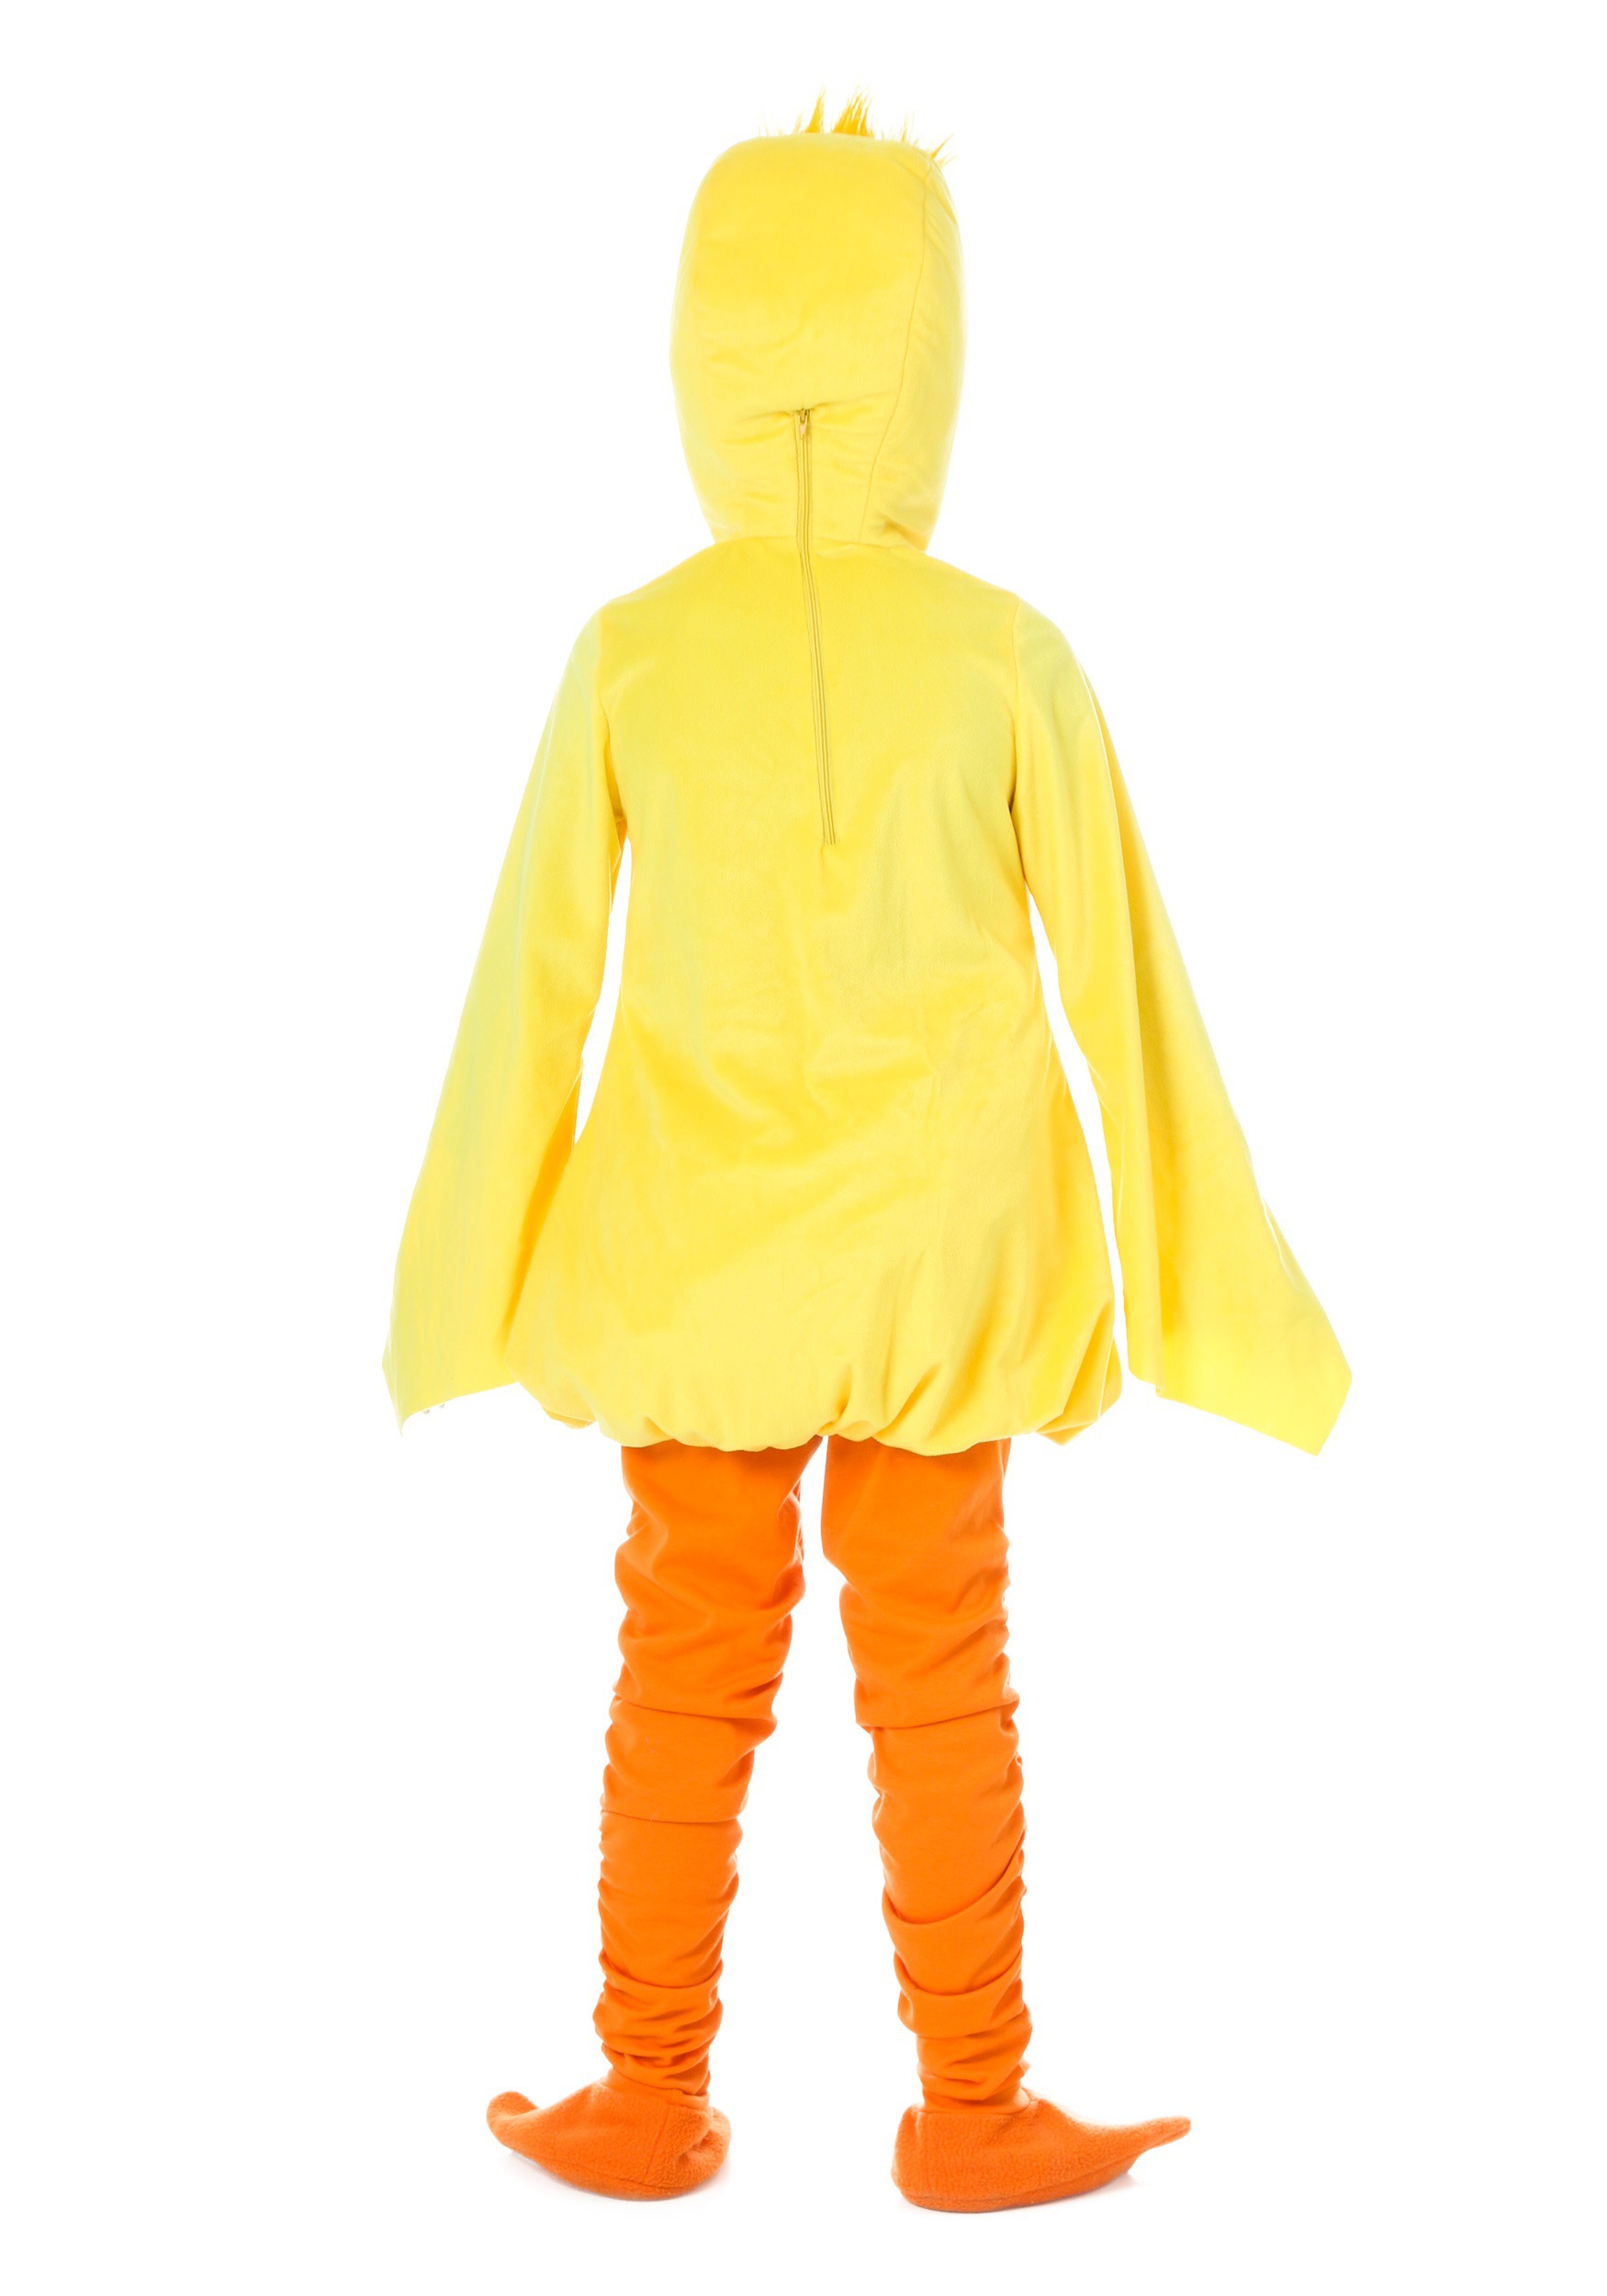 Duck Costume For Adults 64